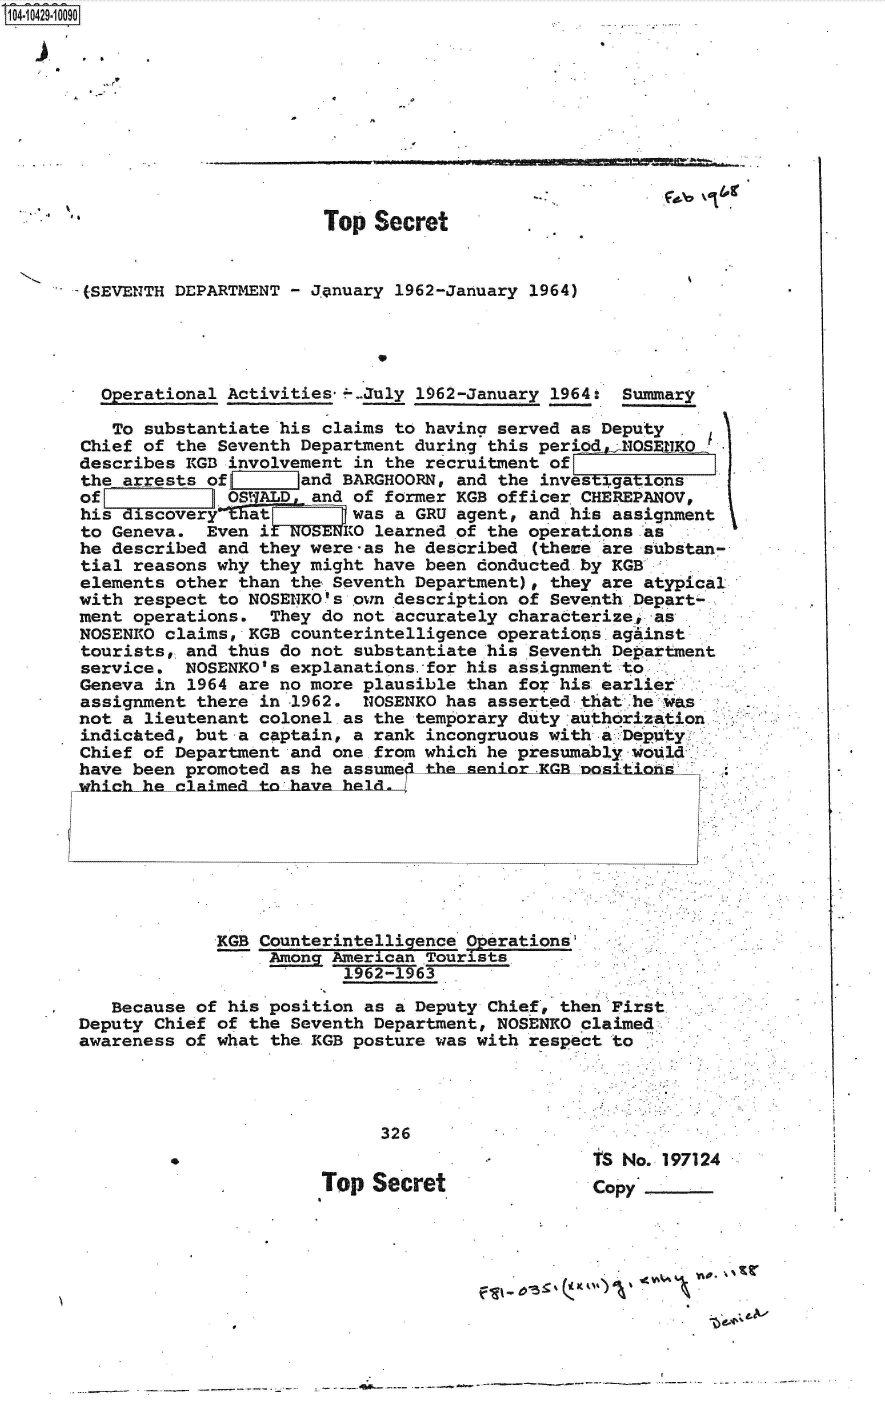 handle is hein.jfk/jfkarch48595 and id is 1 raw text is: 14 i42910090










                              Top  Secret


       (SEVENTH DEPARTMENT - J.anuary 1962-January 1964)


                                   *

          perational Activities*---July 1962-January 1964: Summary

          To substantiate his claims to having served as Deputy
       Chief of the Seventh Department during this periode1INOSERHKO
       describes KGB involvement in the recruitment of
       the arrests of J    land BARGHOORN, and the investigati ons
       of            OSALD   and of former KGB officer CHEREPANOV,
       his discovery that _      was a GRU agent, and his assignment
       to Geneva.  Even i UNOSENKO learned of the operations as
       he described and they were-as he described (these are substan-
       tial reasons why they might have been donducted by KGB
       elements other than the Seventh Department), they are atypical
       with respect to NOSENKO's own description of Seventh Depart-
       ment operations.  They do not accurately characterize, as
       NOSENRO claims, KGB counterintelligence operations against
       tourists, and thus do not substantiate his Seventh Department
       service.  NOSENKO's explanations.for his assignment to
       Geneva in 1964 are no more plausible than for his earlier
       assignment there in 1962.  NOSENKO has asserted that he was
       not a lieutenant colonel as the temporary duty authorization
       indicated, but a captain, a rank incongruous with a :Deputy
       Chief of Department and one from which he presumably would
       have been promoted as he assume   he unior.x     nni








                    KGB Counterintelligence Operations
                         Among American Tourists
                                1962-1963

          Because of his position as a Deputy Chief, then First
      Deputy  Chief of the Seventh Department, NOSENKO claimed
      awareness  of what the KGB posture was with respect to




                                   326
                                                        tS No. 197124
                              Top  Secret               copy





                                                  -f &'I


